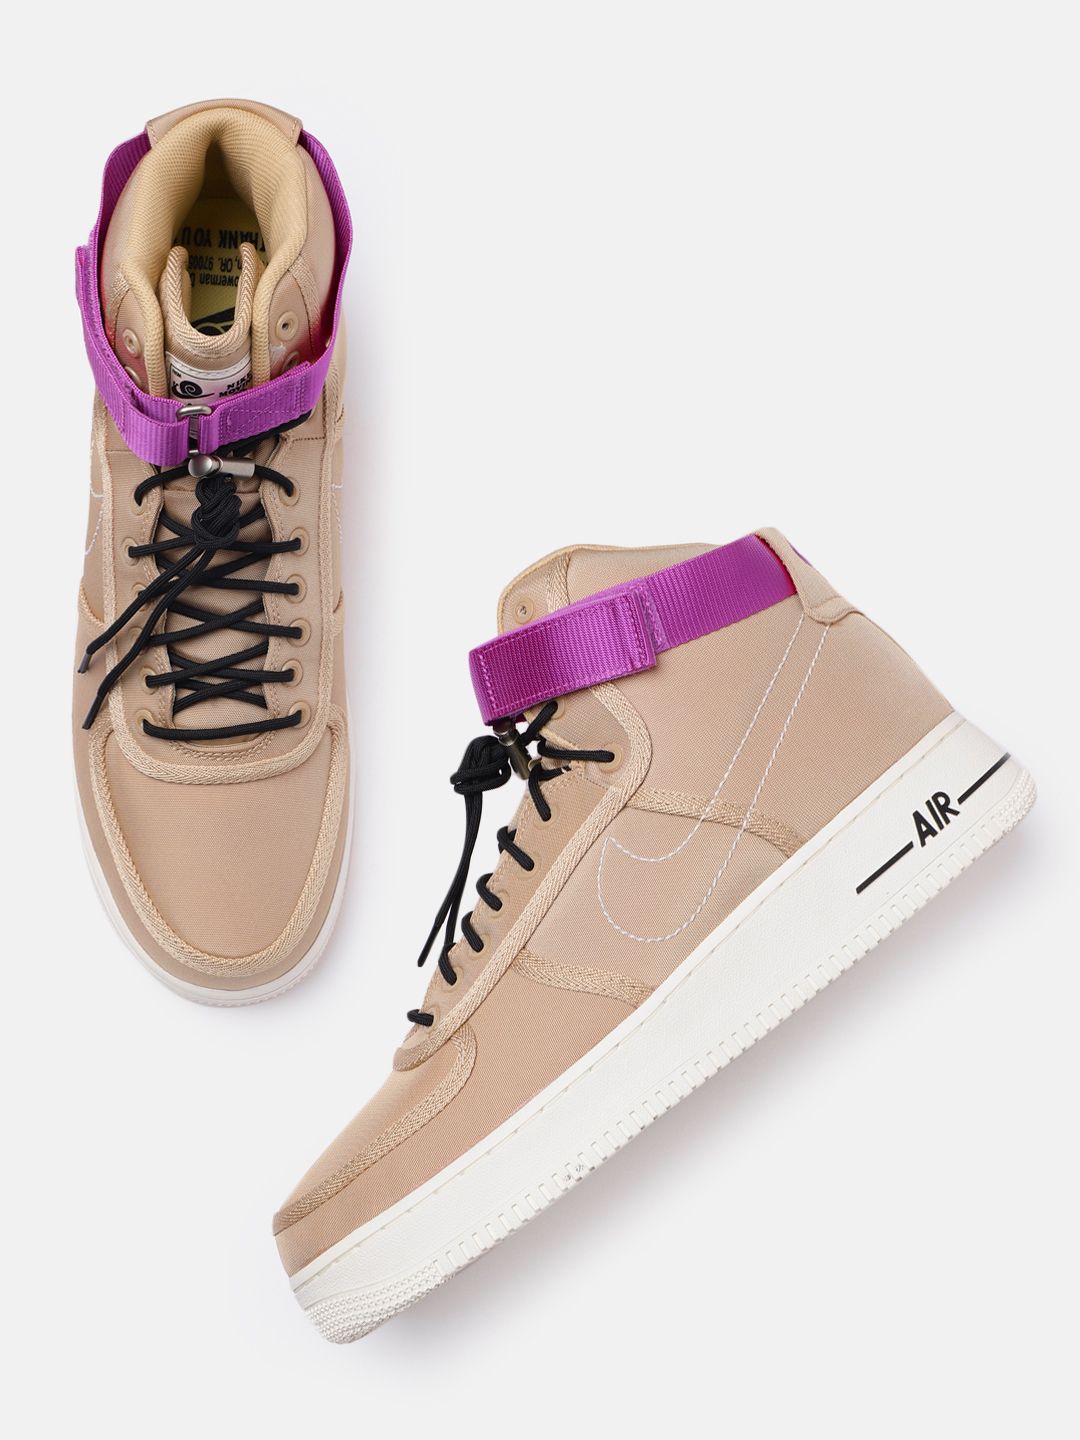 Nike Air Force 1 '07 LV8 1 Men's Shoes